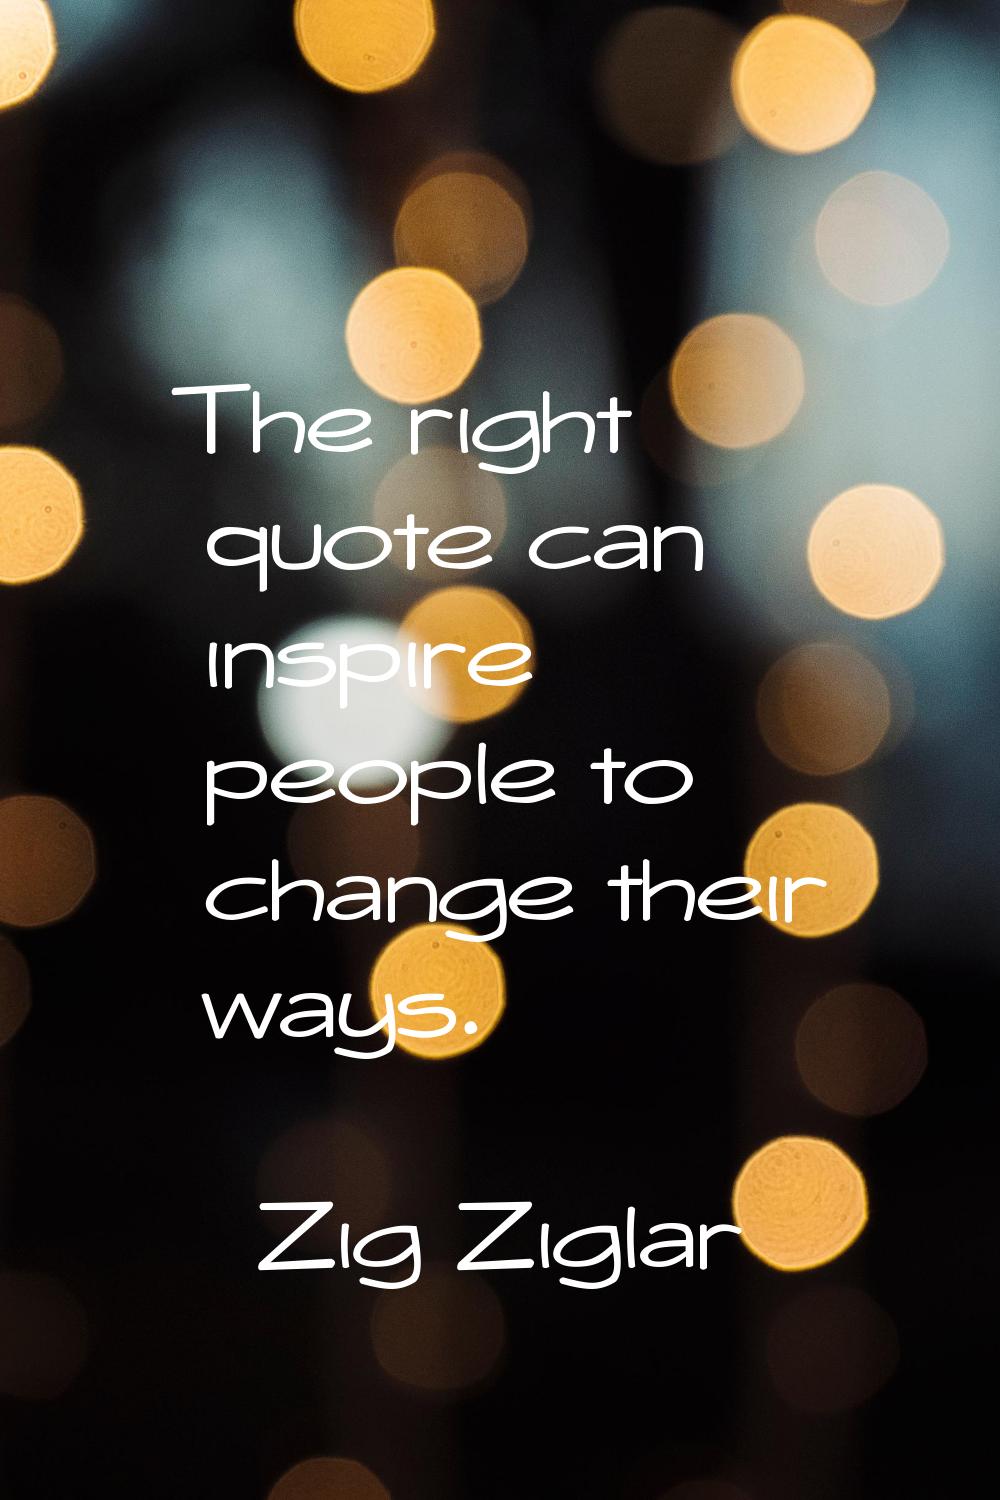 The right quote can inspire people to change their ways.